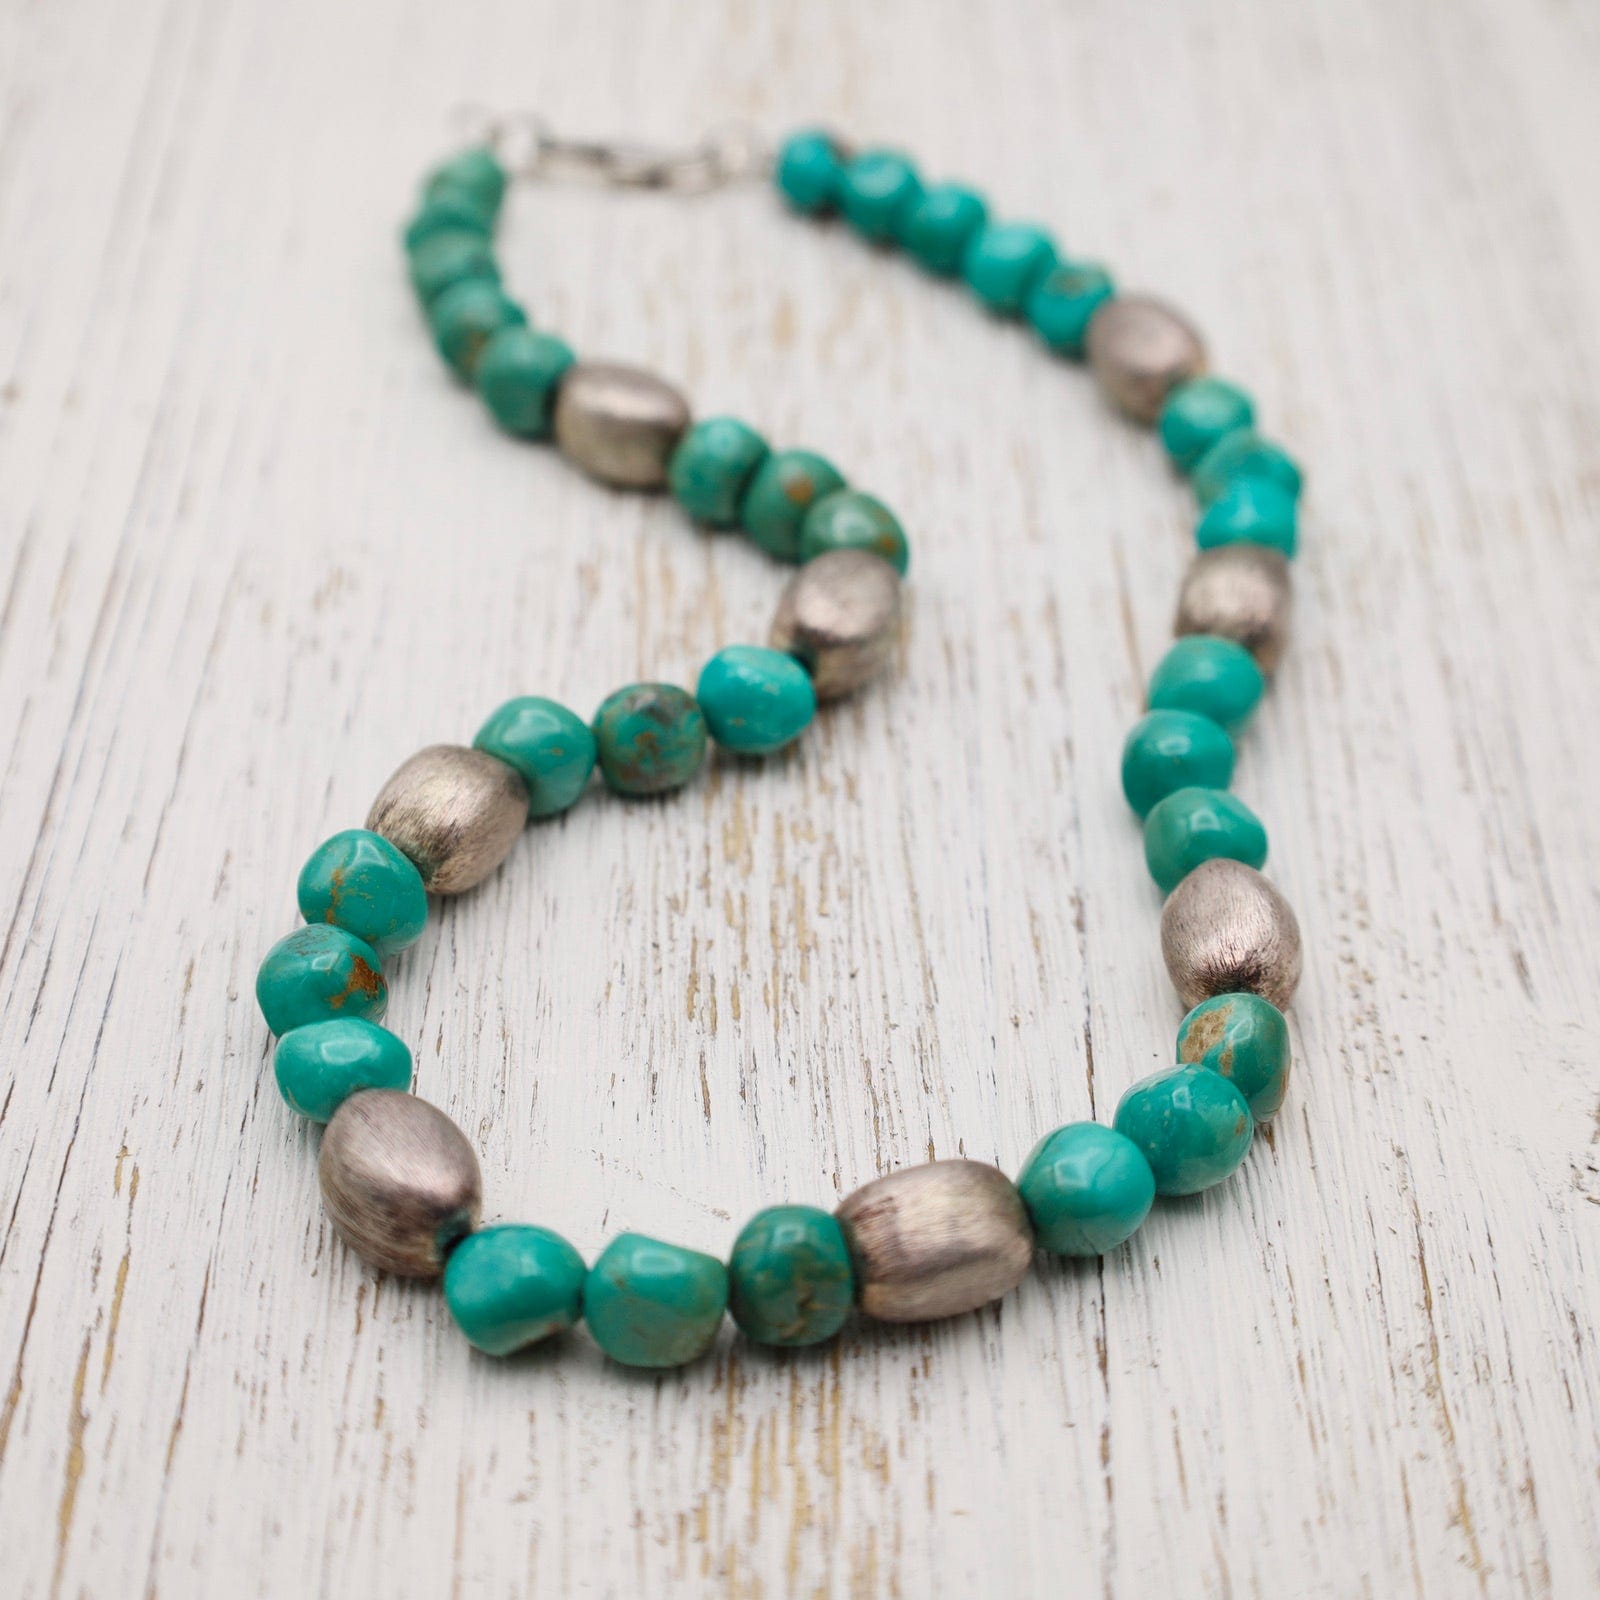 Kingman Turquoise Necklace with Magnetic Clasp - Magnetic Chains